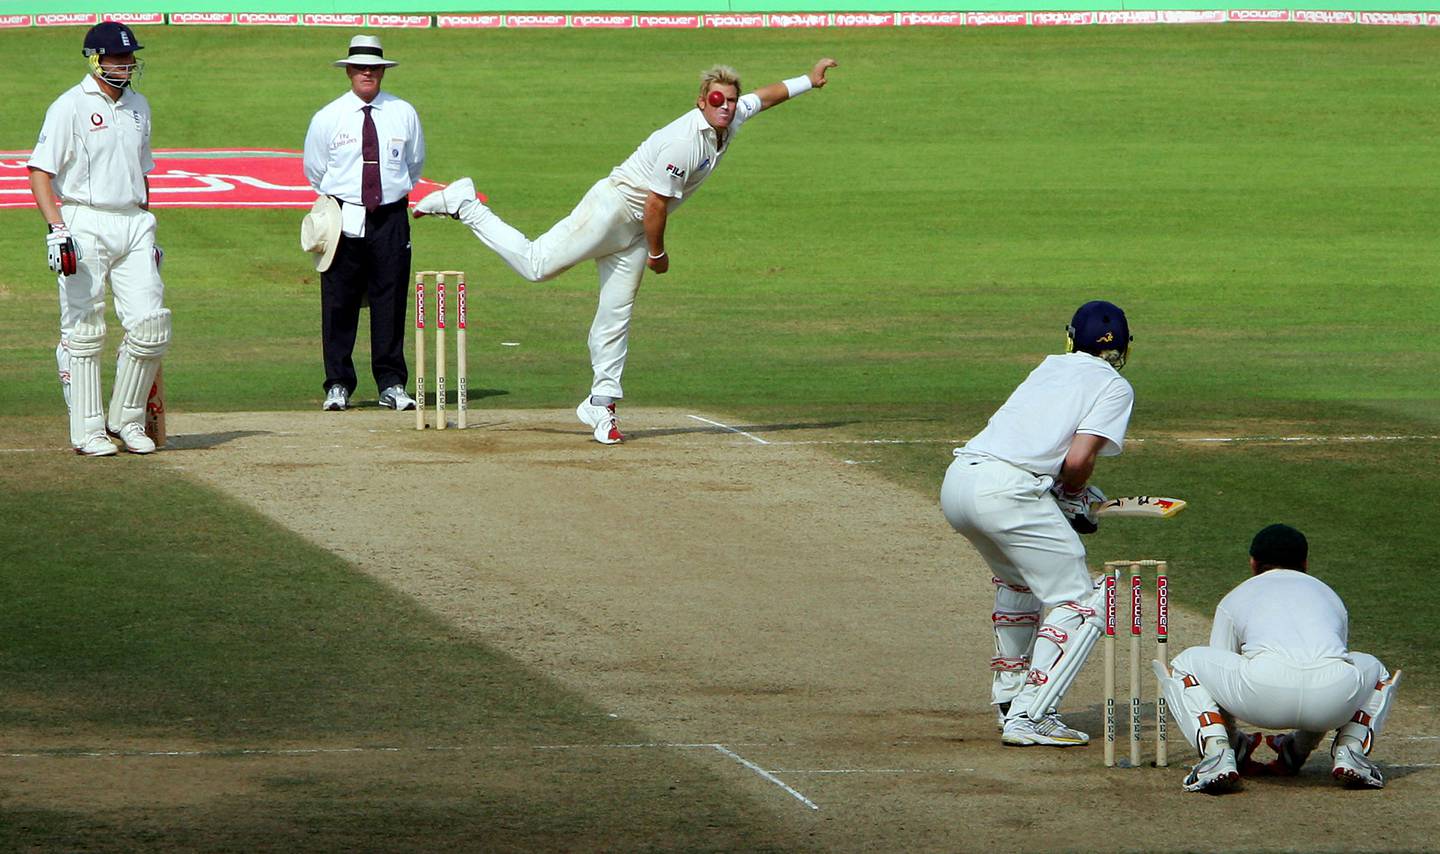 Shane Warne bowls to England's Kevin Pietersen during the fifth Ashes Test at the Oval in London in 2005. AFP